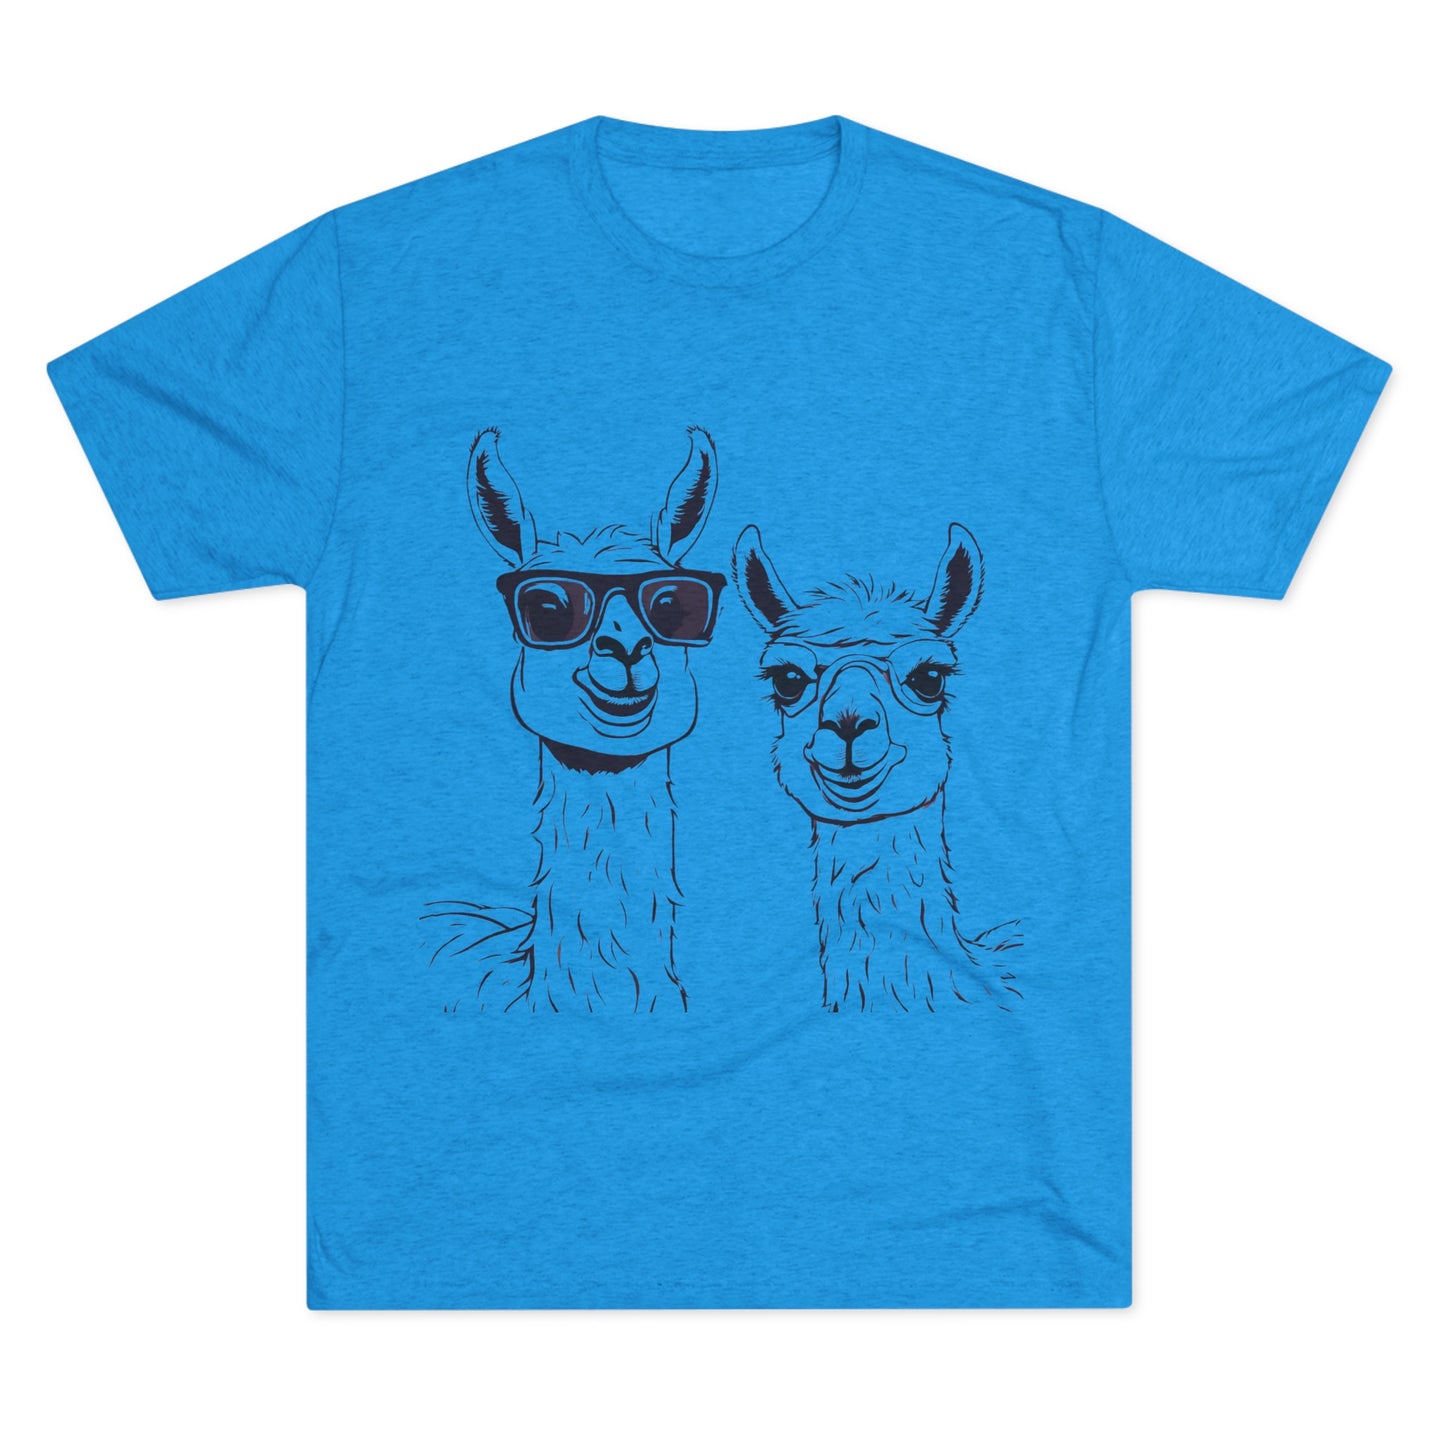 A blue Llamas - Tri-Blend Crew Tee - Unisex Fit by Printify featuring a drawing of two llamas. The llama on the left is wearing sunglasses and smiling, while the llama on the right has a content expression. The illustration is in black outlines with minimal detail, perfect for your "No Drama Llama" vibe.